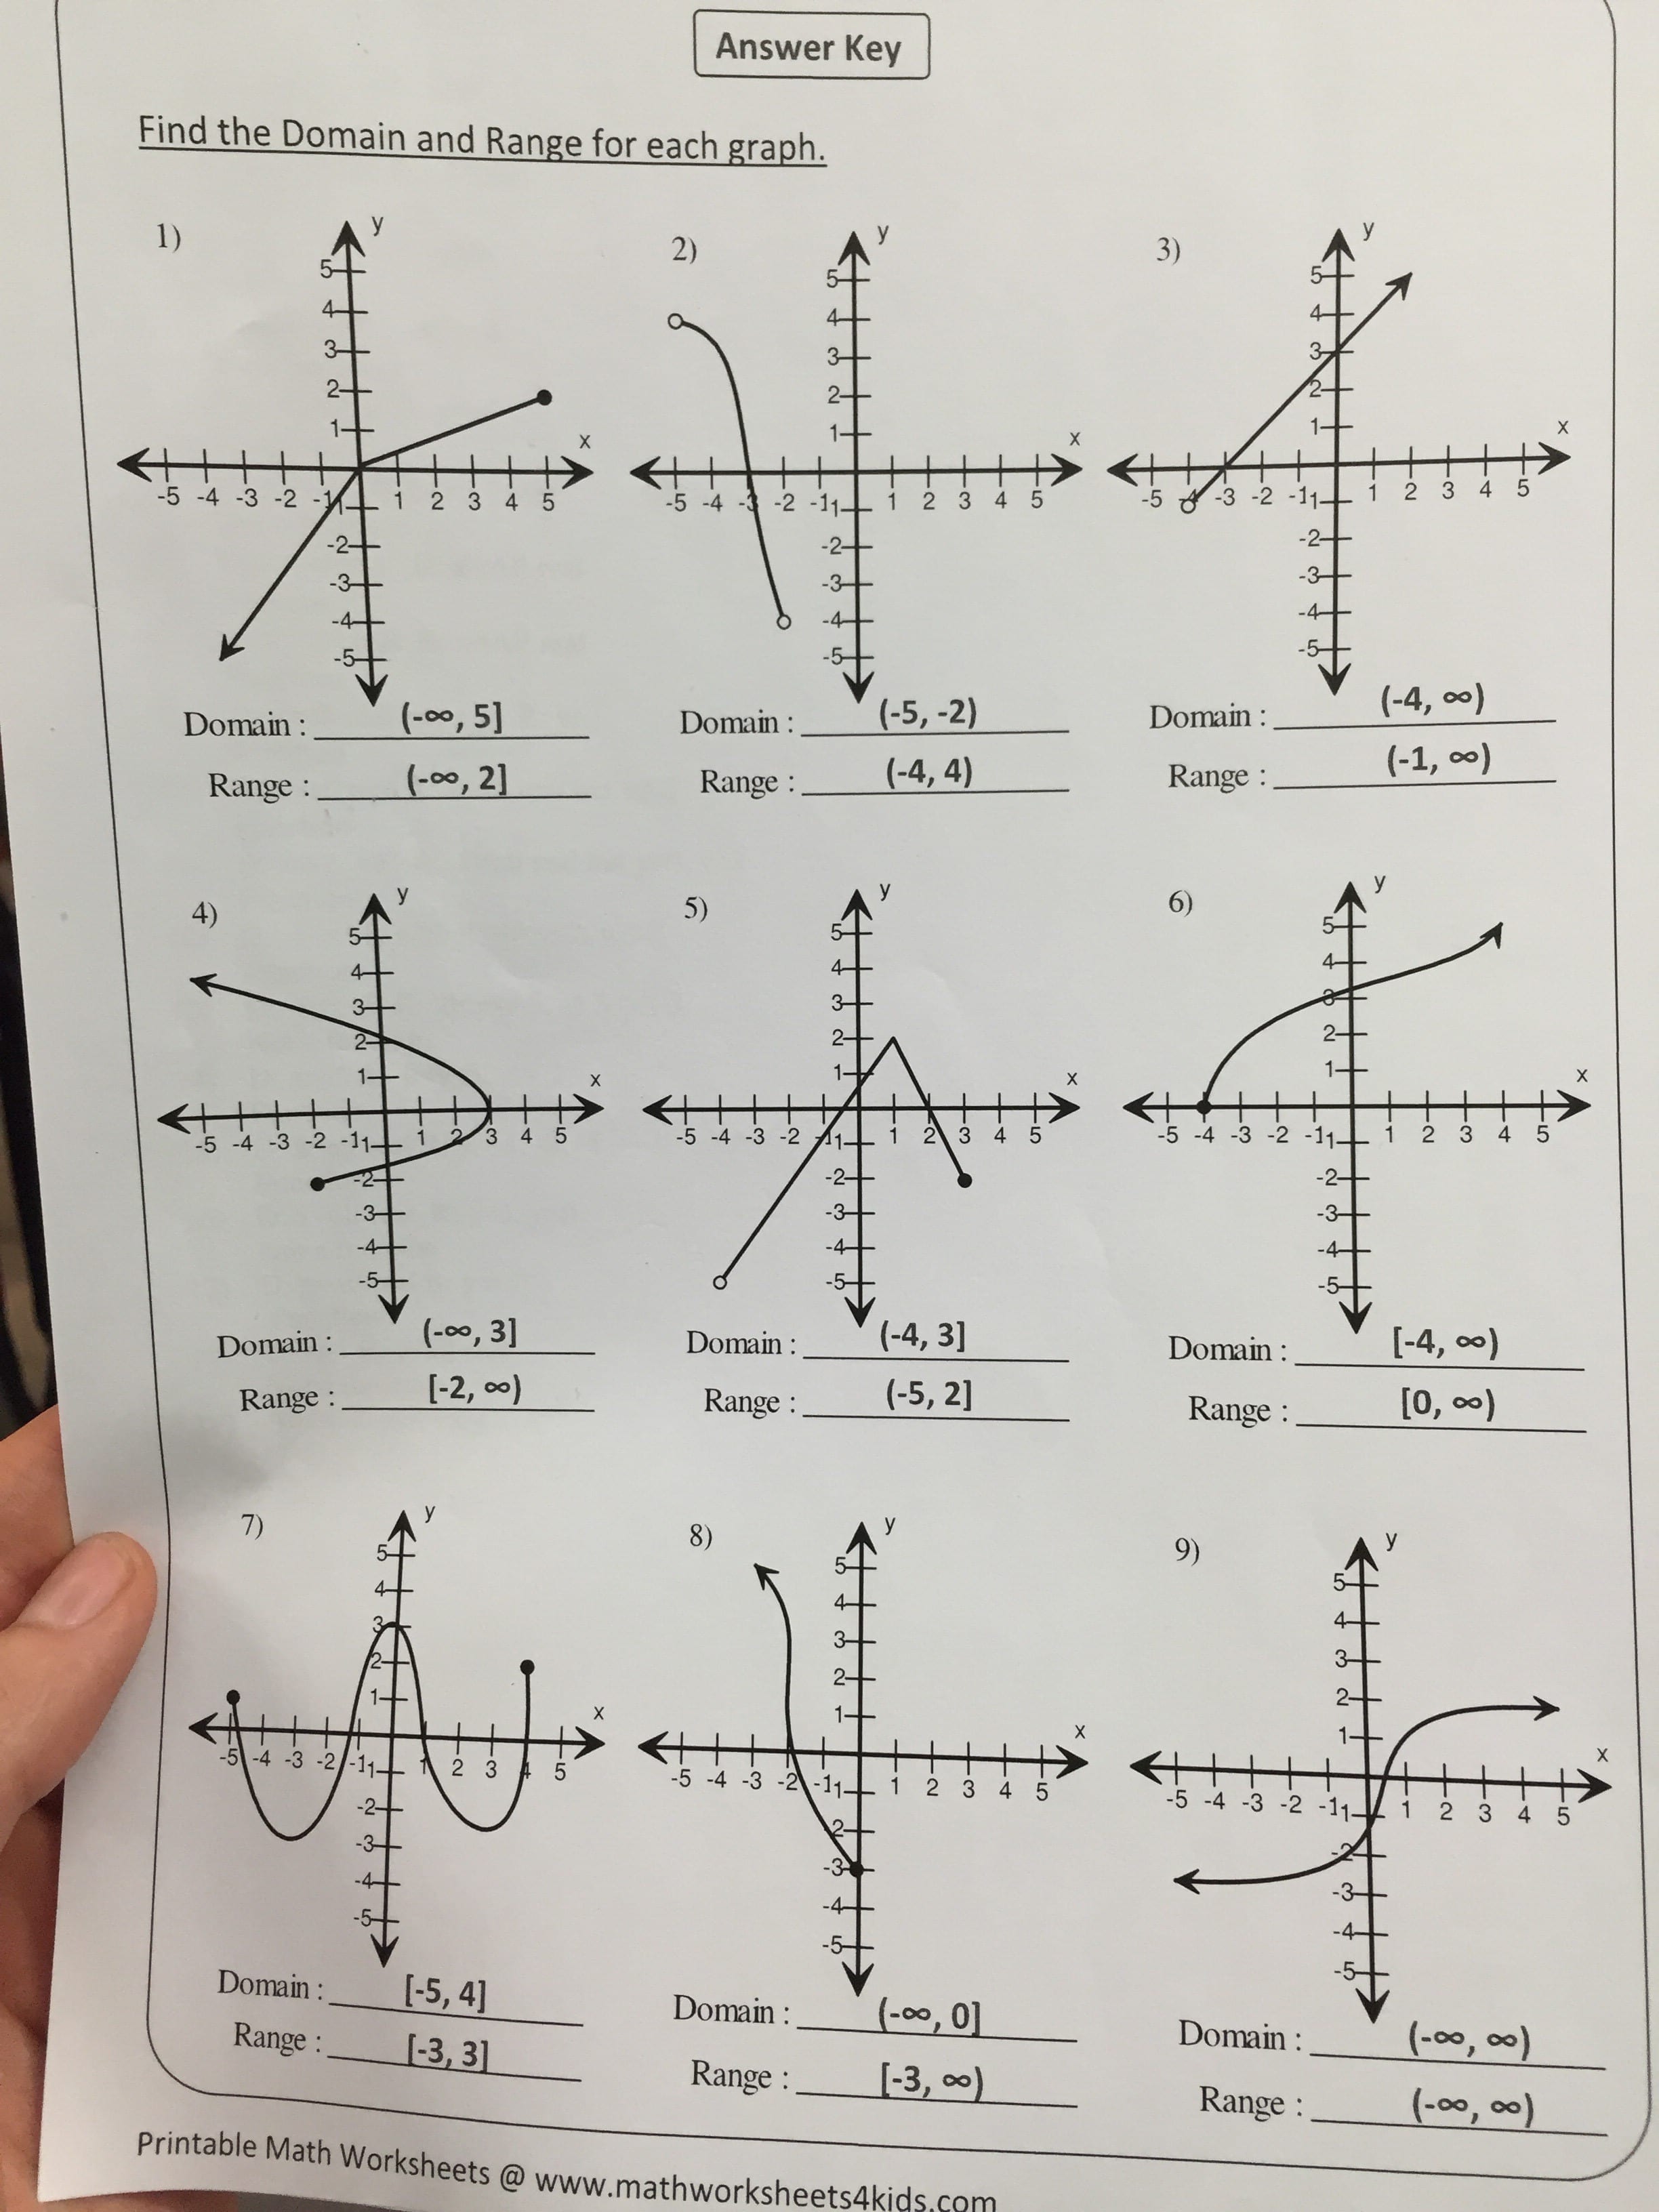 domain-and-range-from-a-graph-worksheet